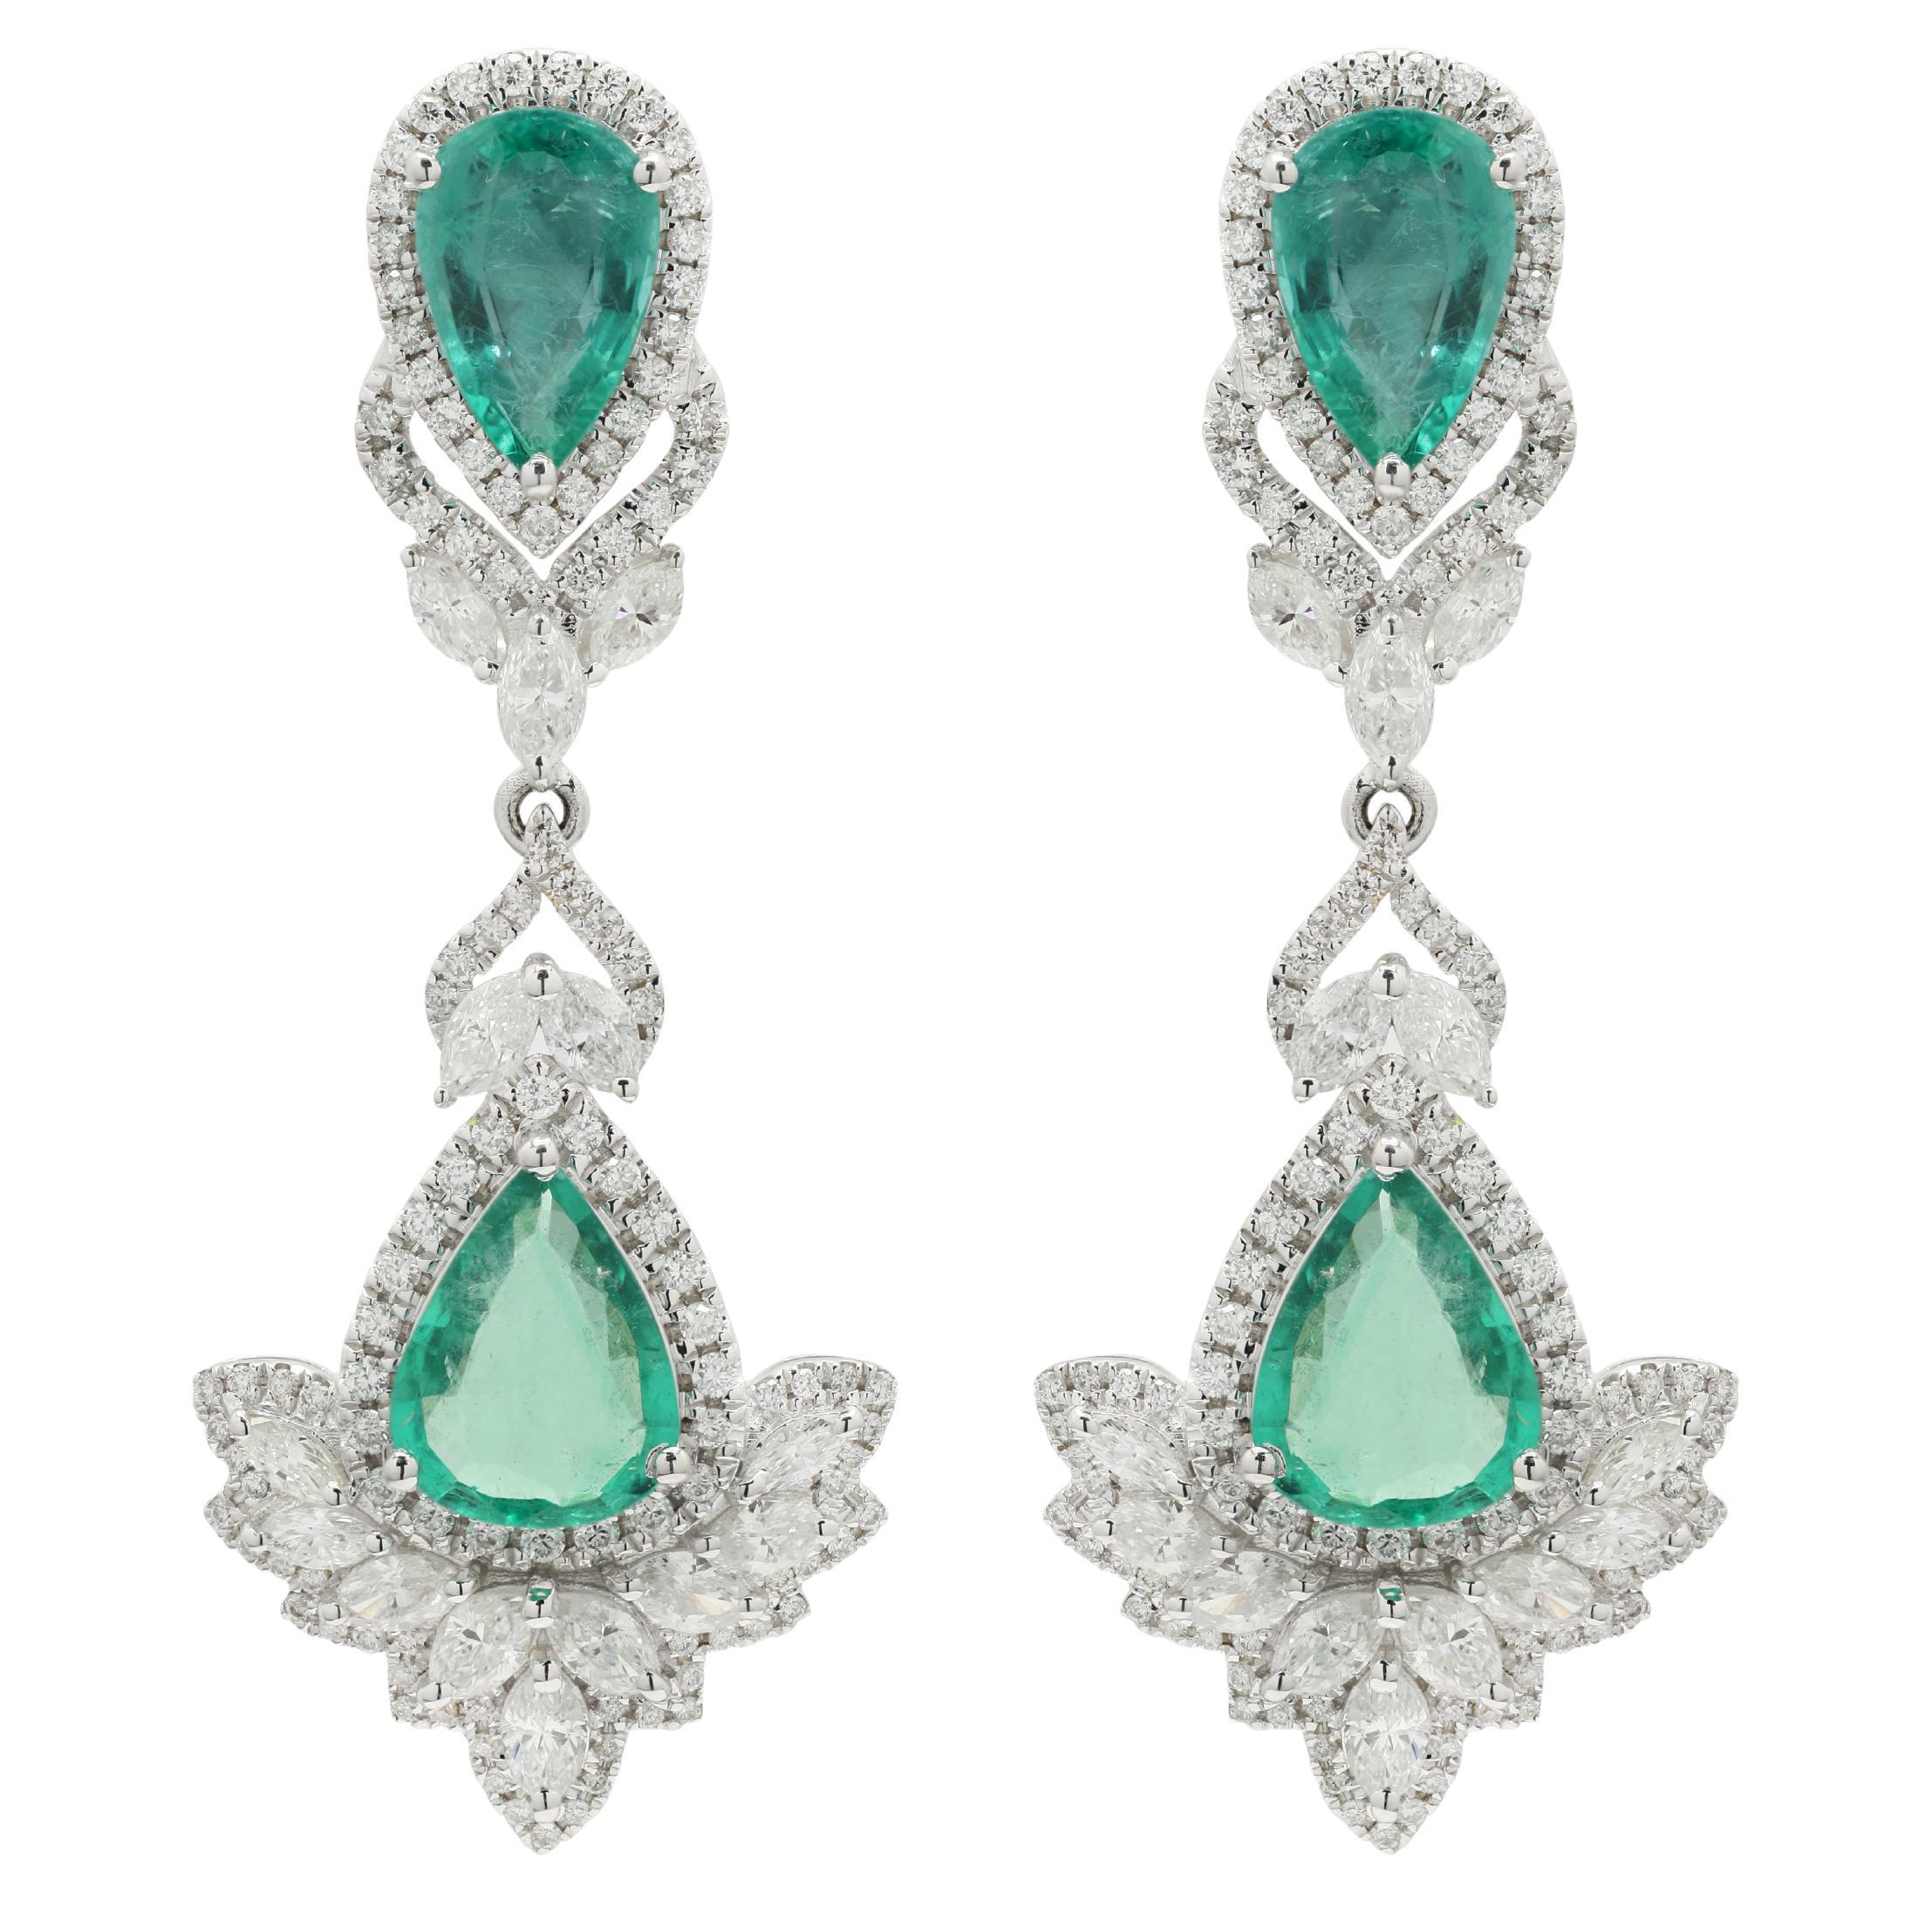 Astonishing 4.23 Ct Emerald and Diamond Wedding Earrings Set in 14K White Gold For Sale